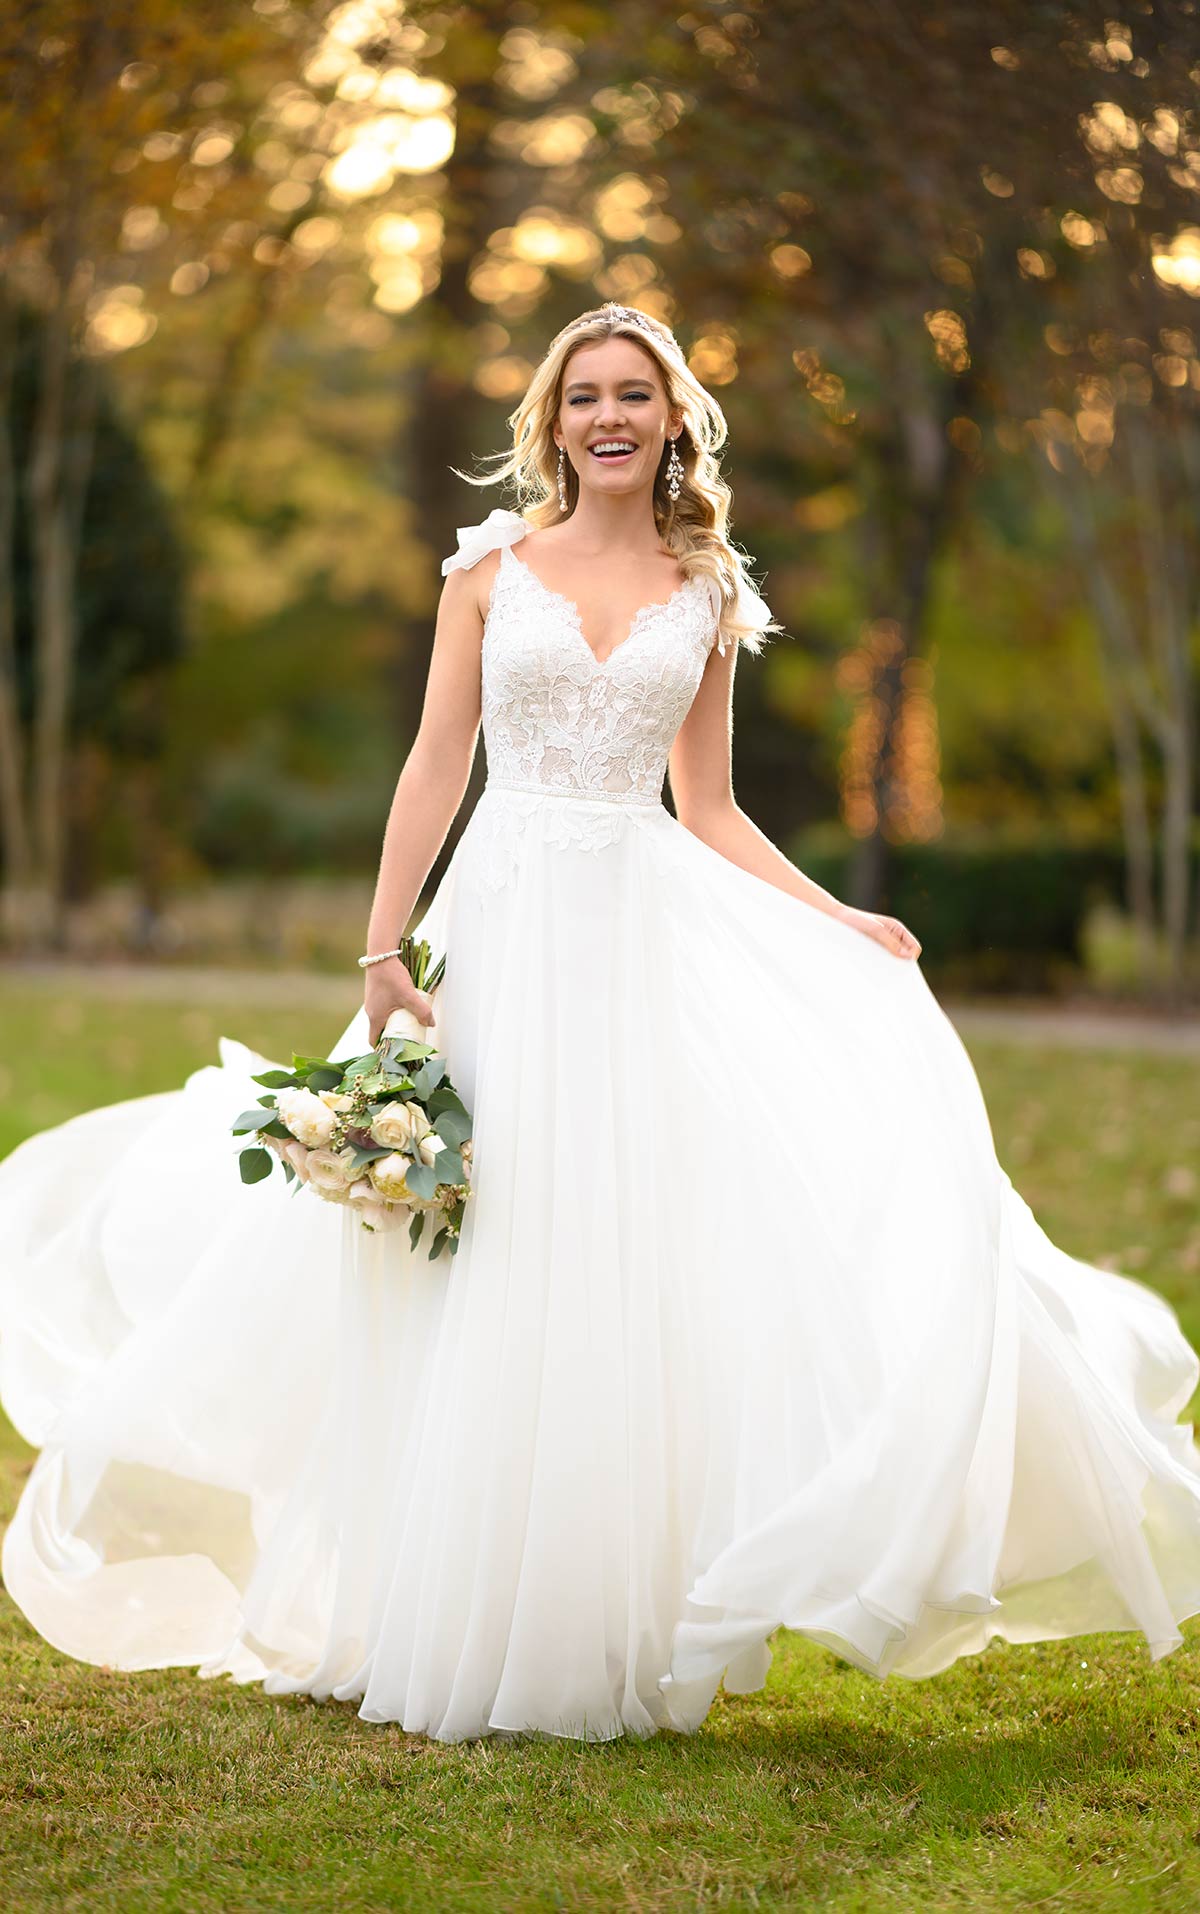 Affordable Wedding Dress Designer Stella York Reveals Fall 2019 Collection Newswire